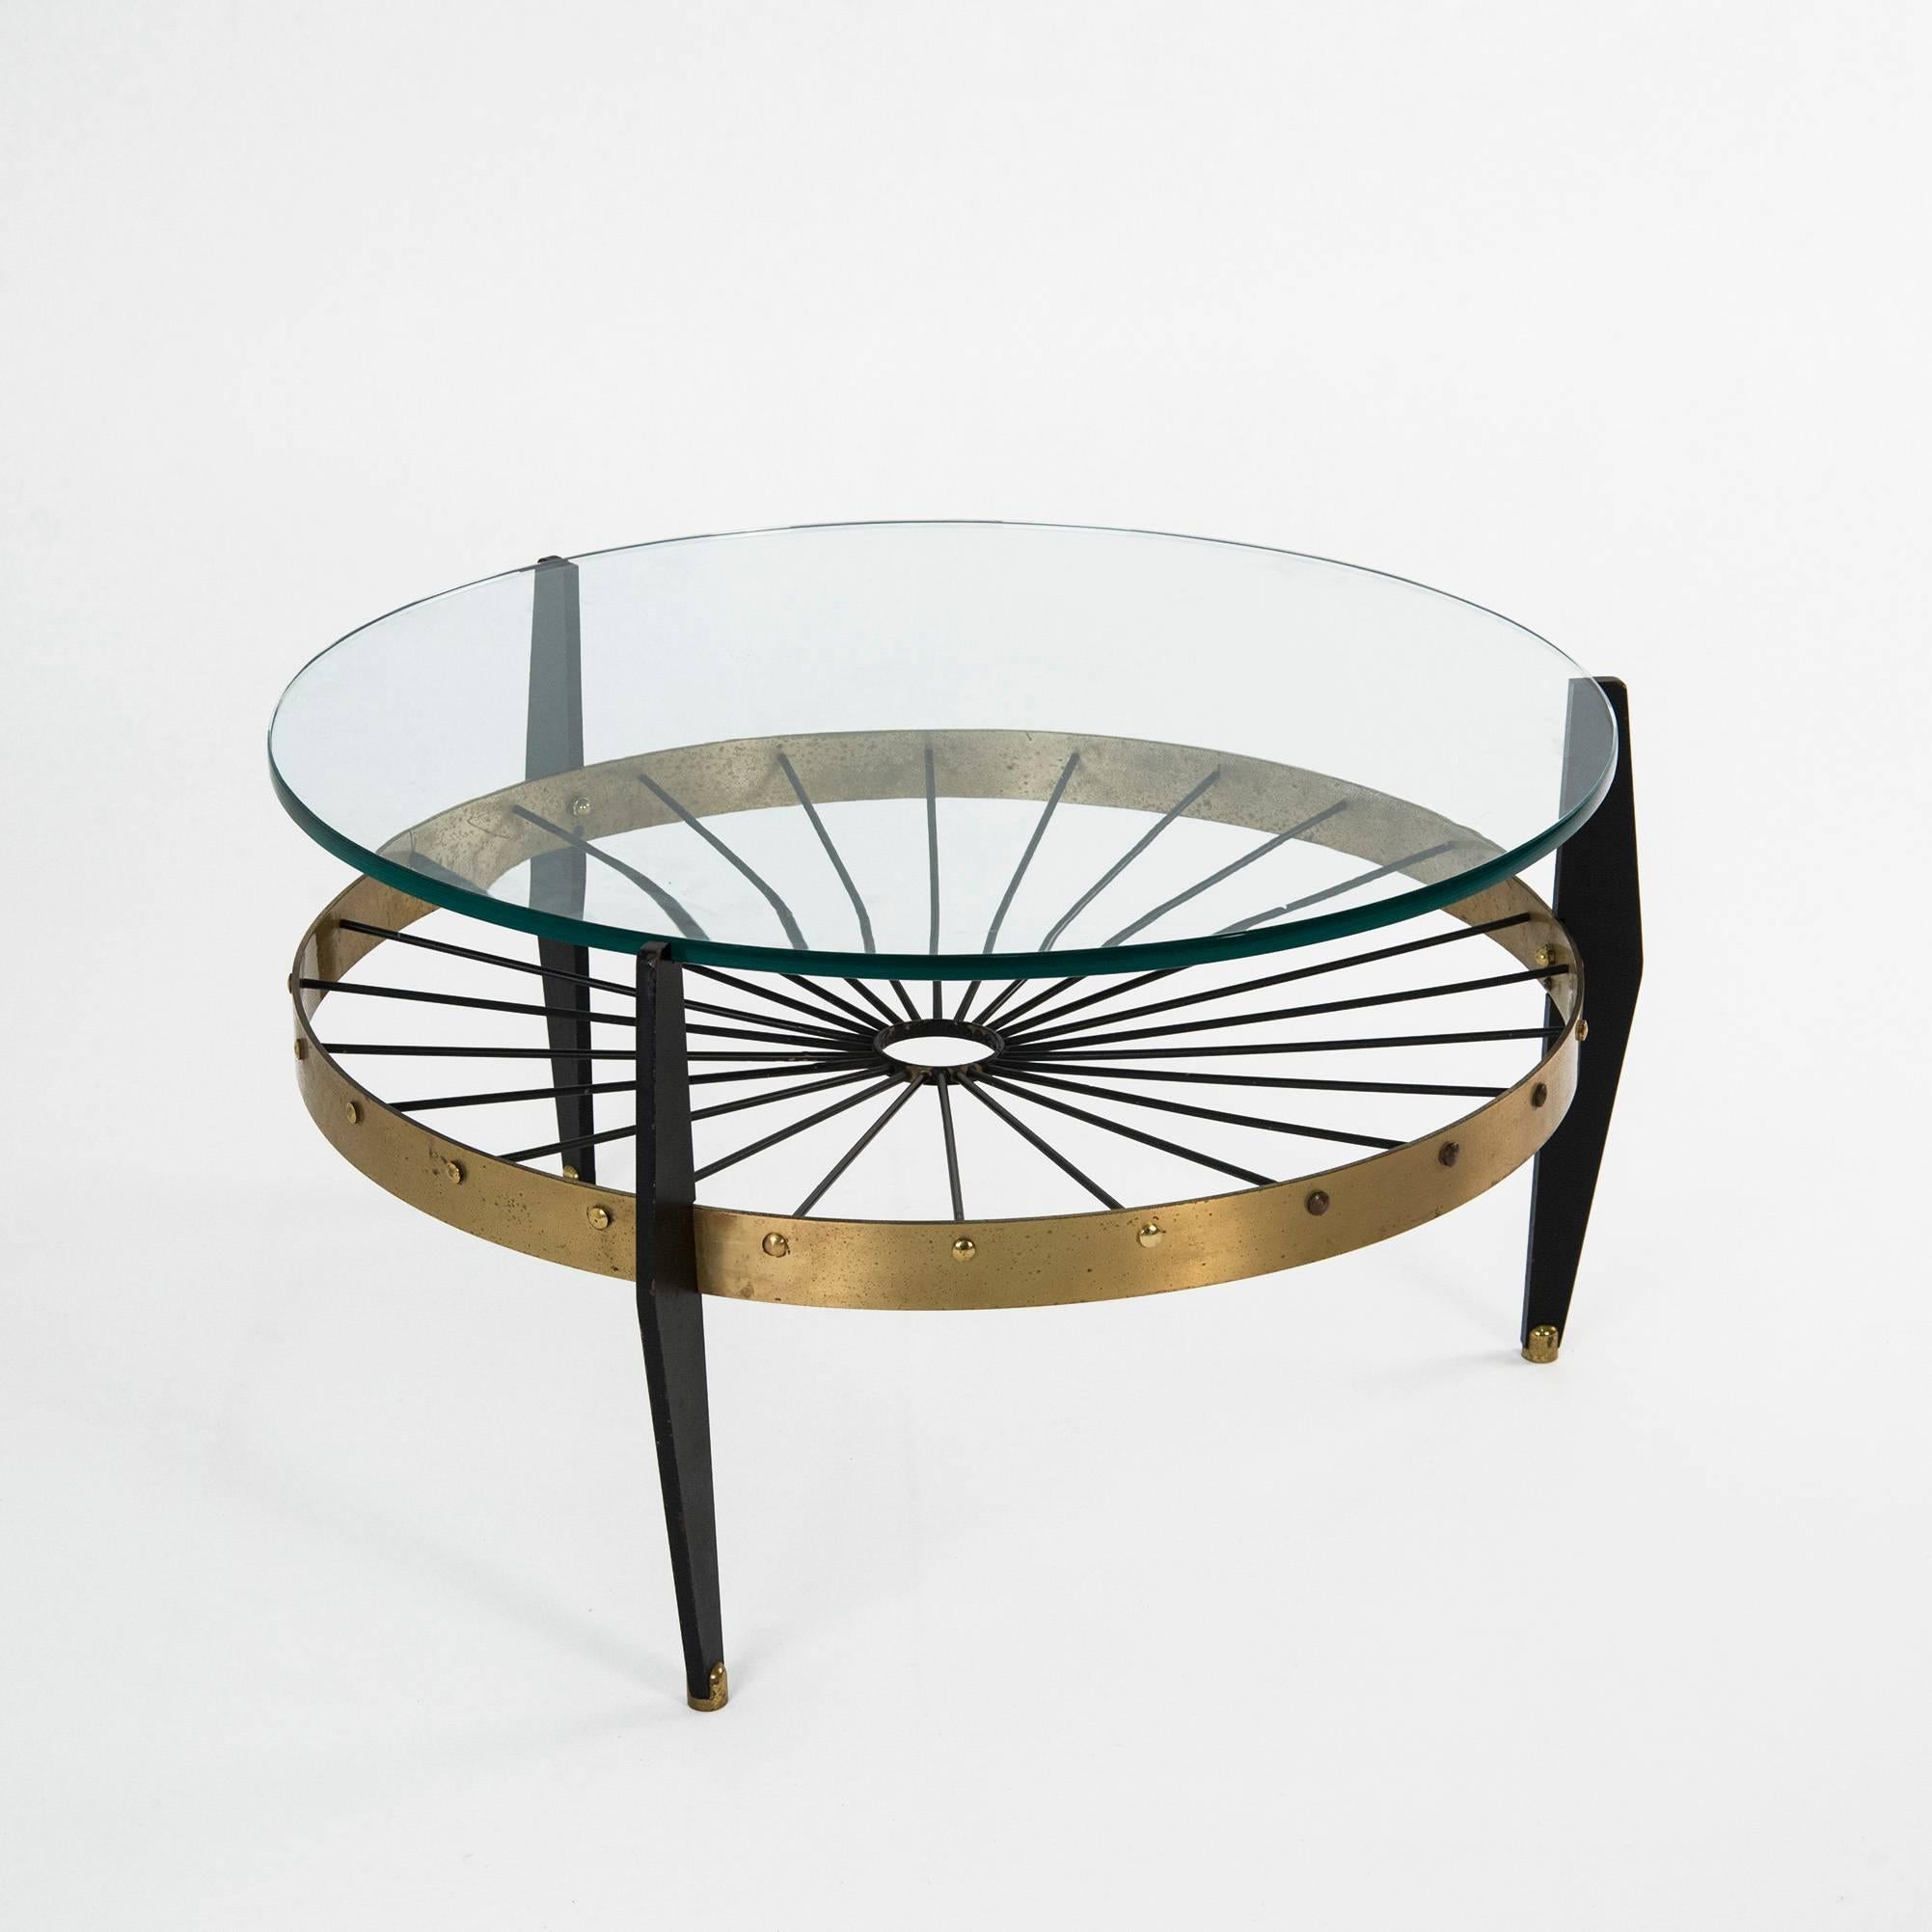 Low table manufactured in Italy in the 1950s. Black lacquered metal legs, copper circular structure, thick glass top. Good original vintage conditions.